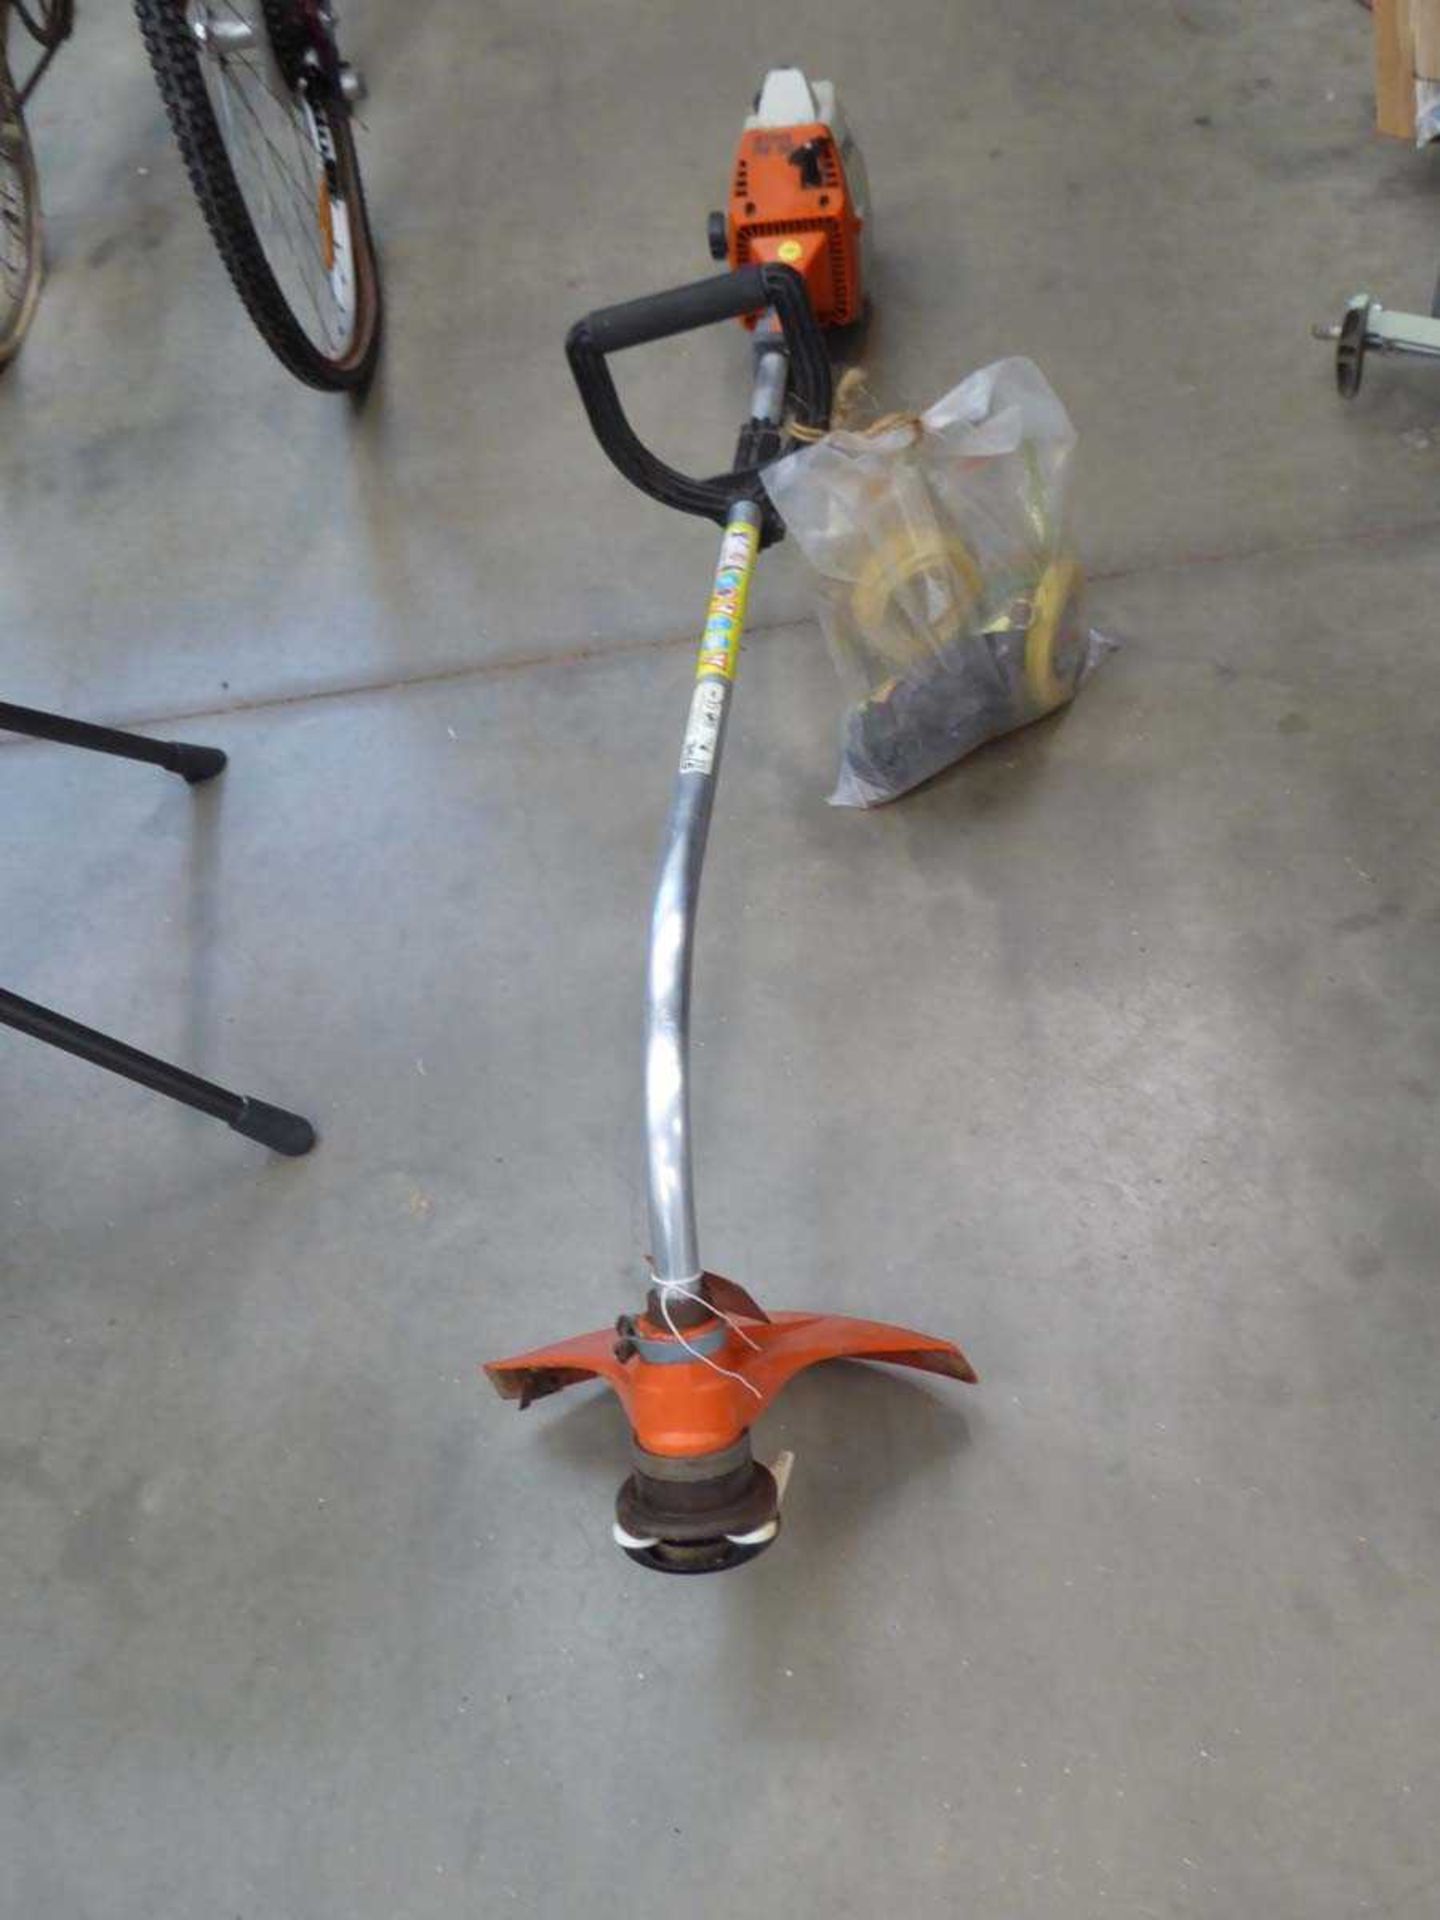 Stihl petrol powered bent shaft strimmer with accessories